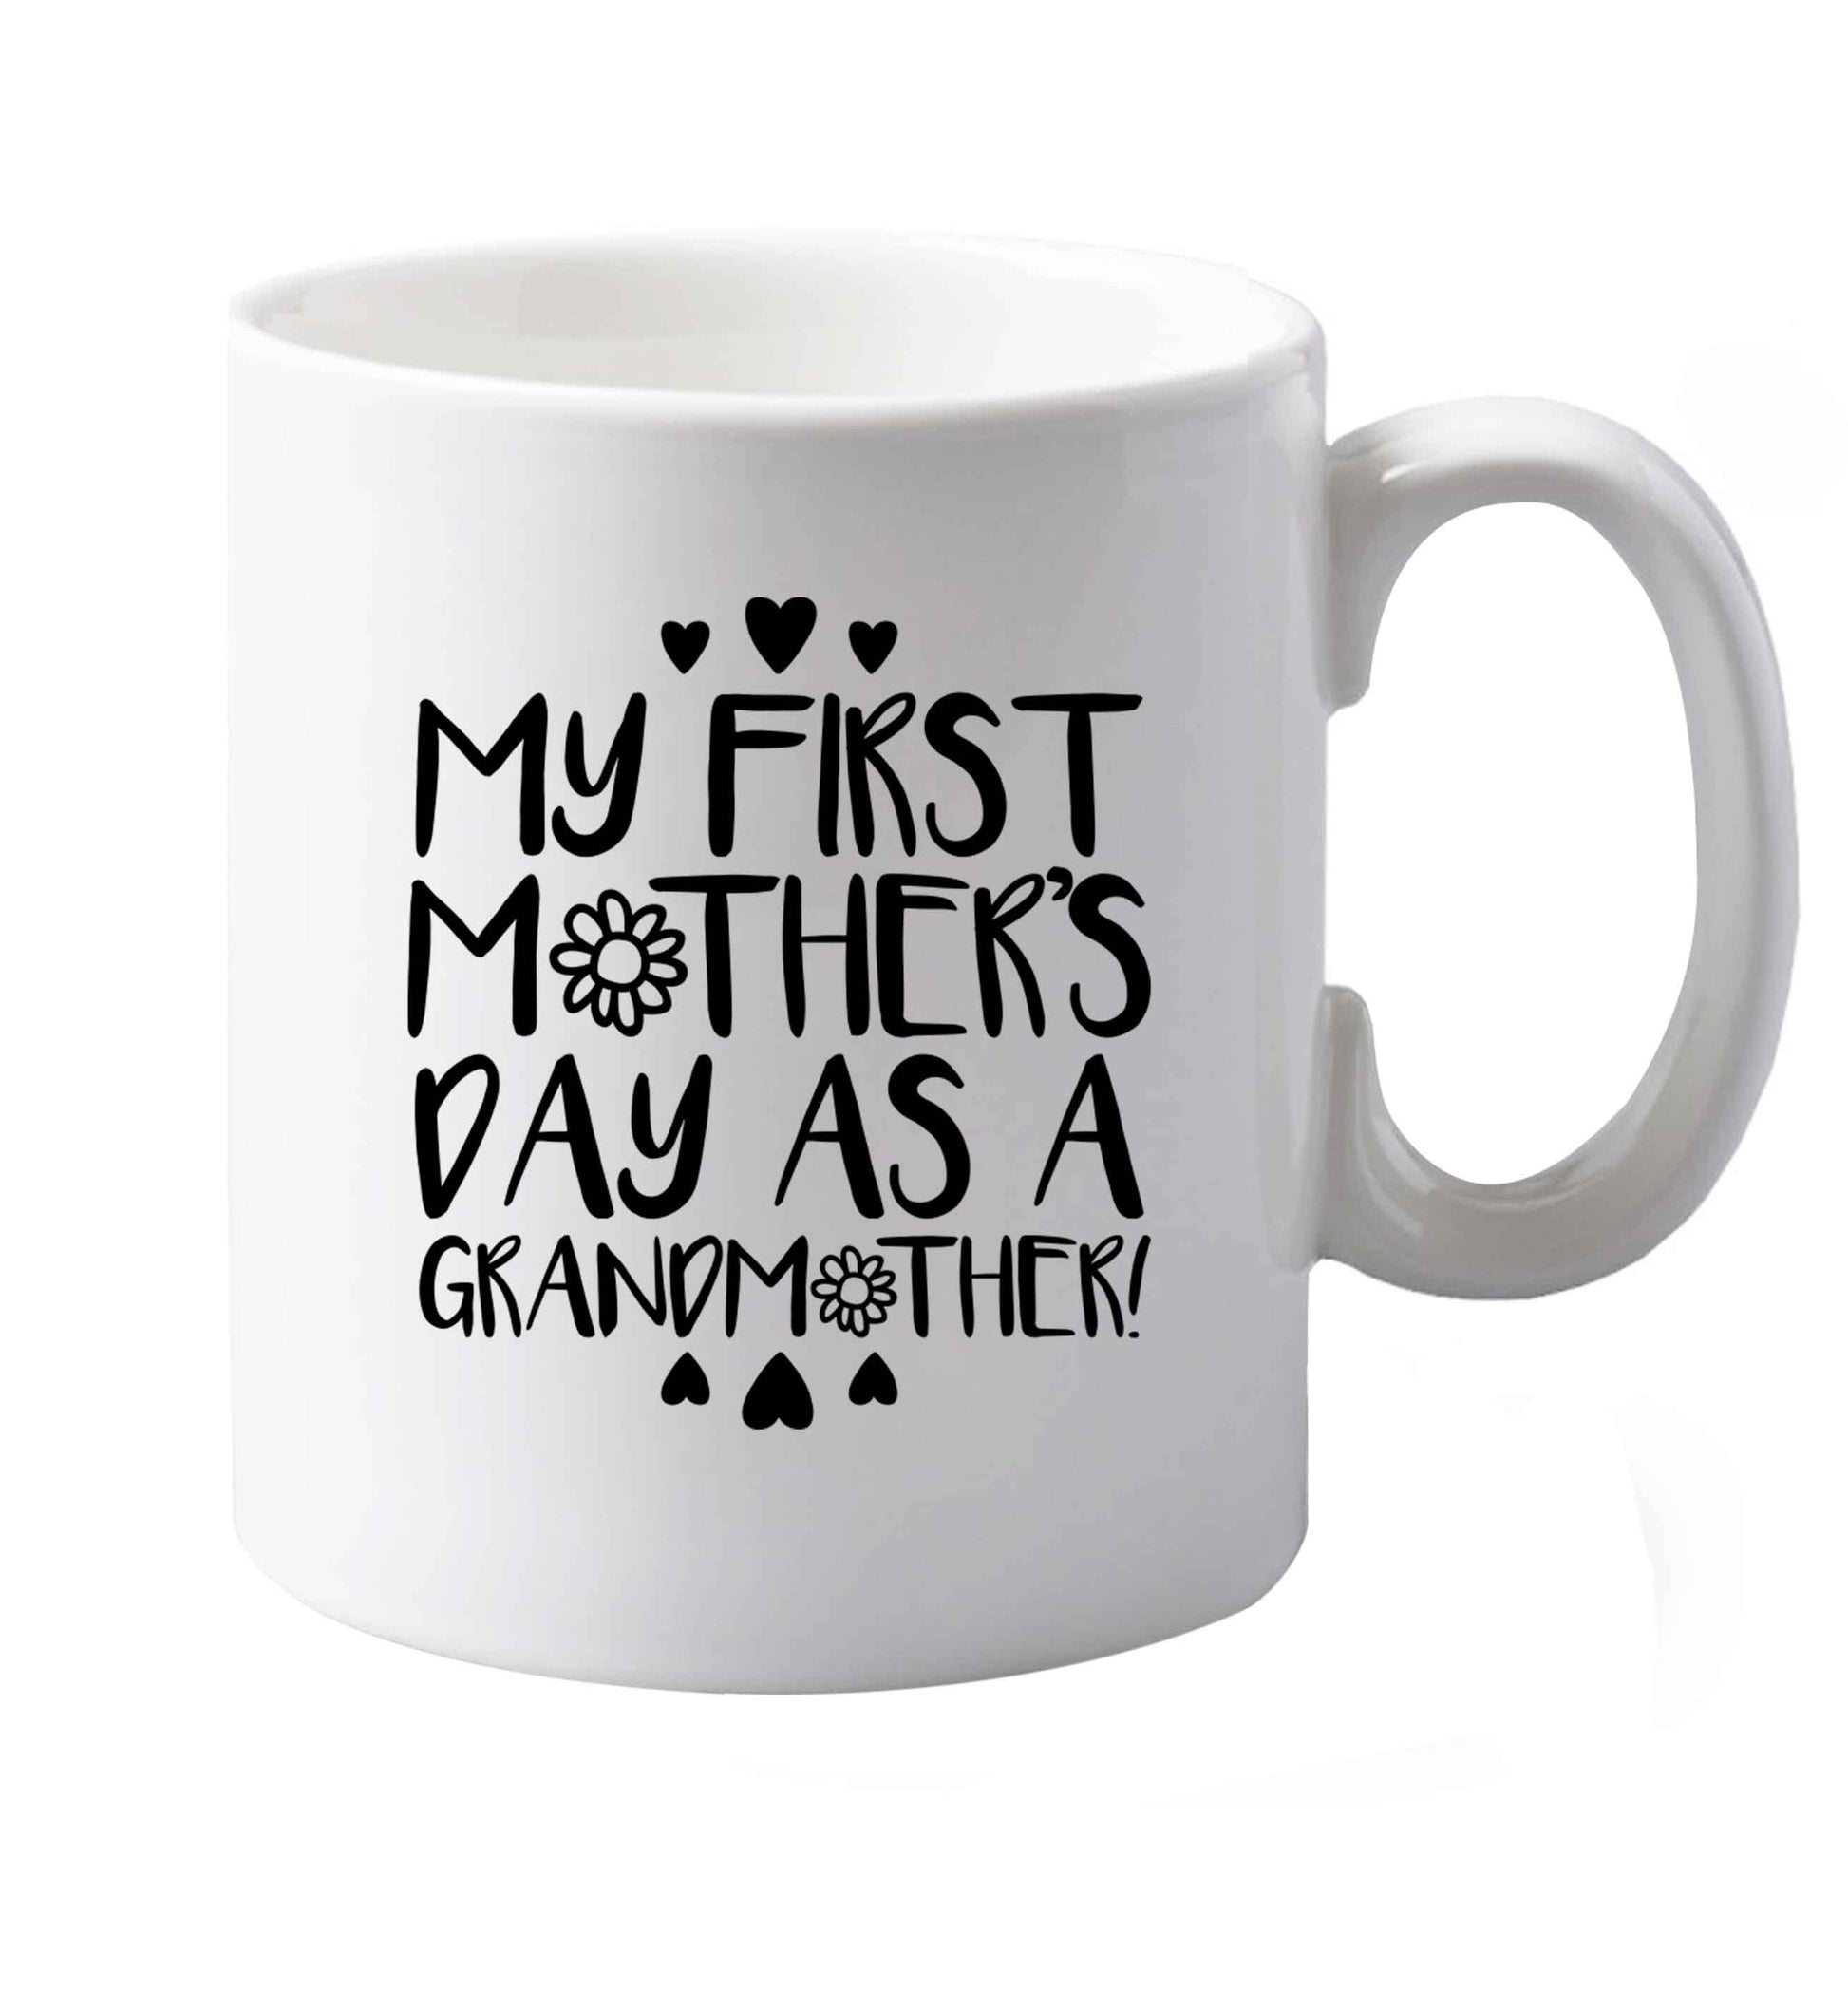 10 oz It's my first mother's day as a grandmother ceramic mug both sides